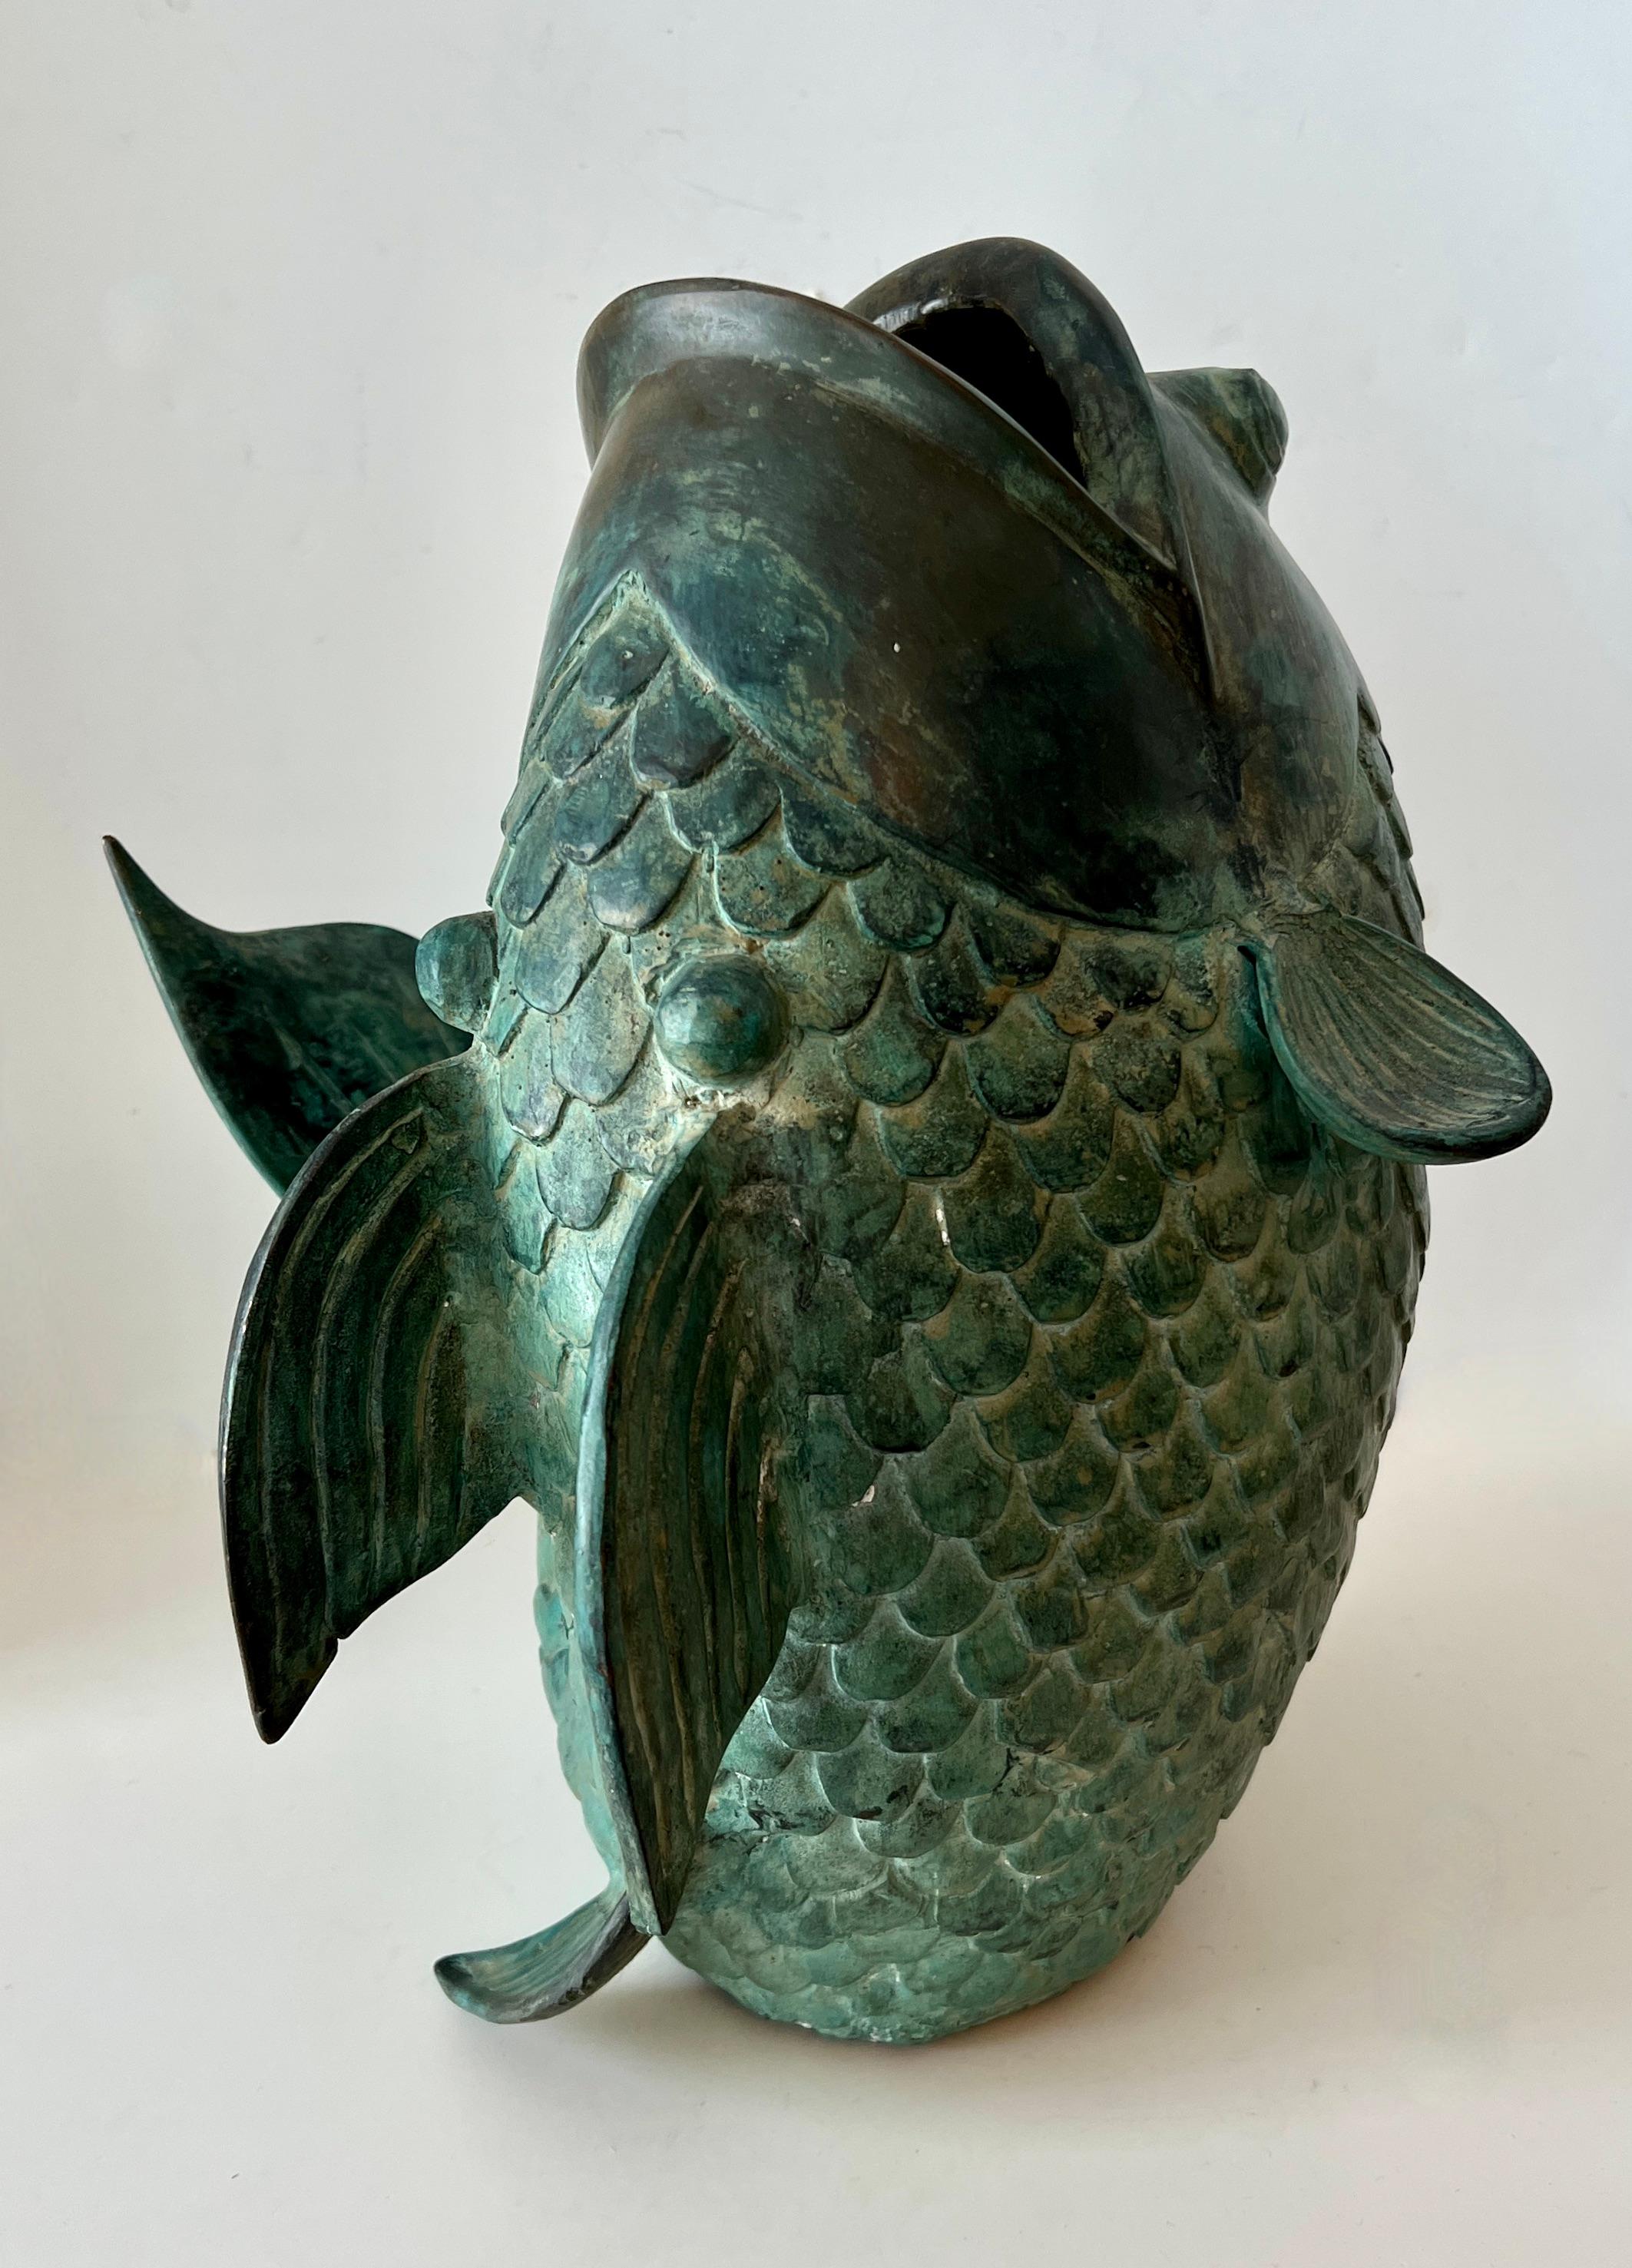 this beautifully designed Koi Fish is the perfect size to be a decorative piece. centerpiece, flower vase, or even (with a little ingenuity) be a fountain.

The bronze is very detailed and also with a perfect amount of patination.   Great for an